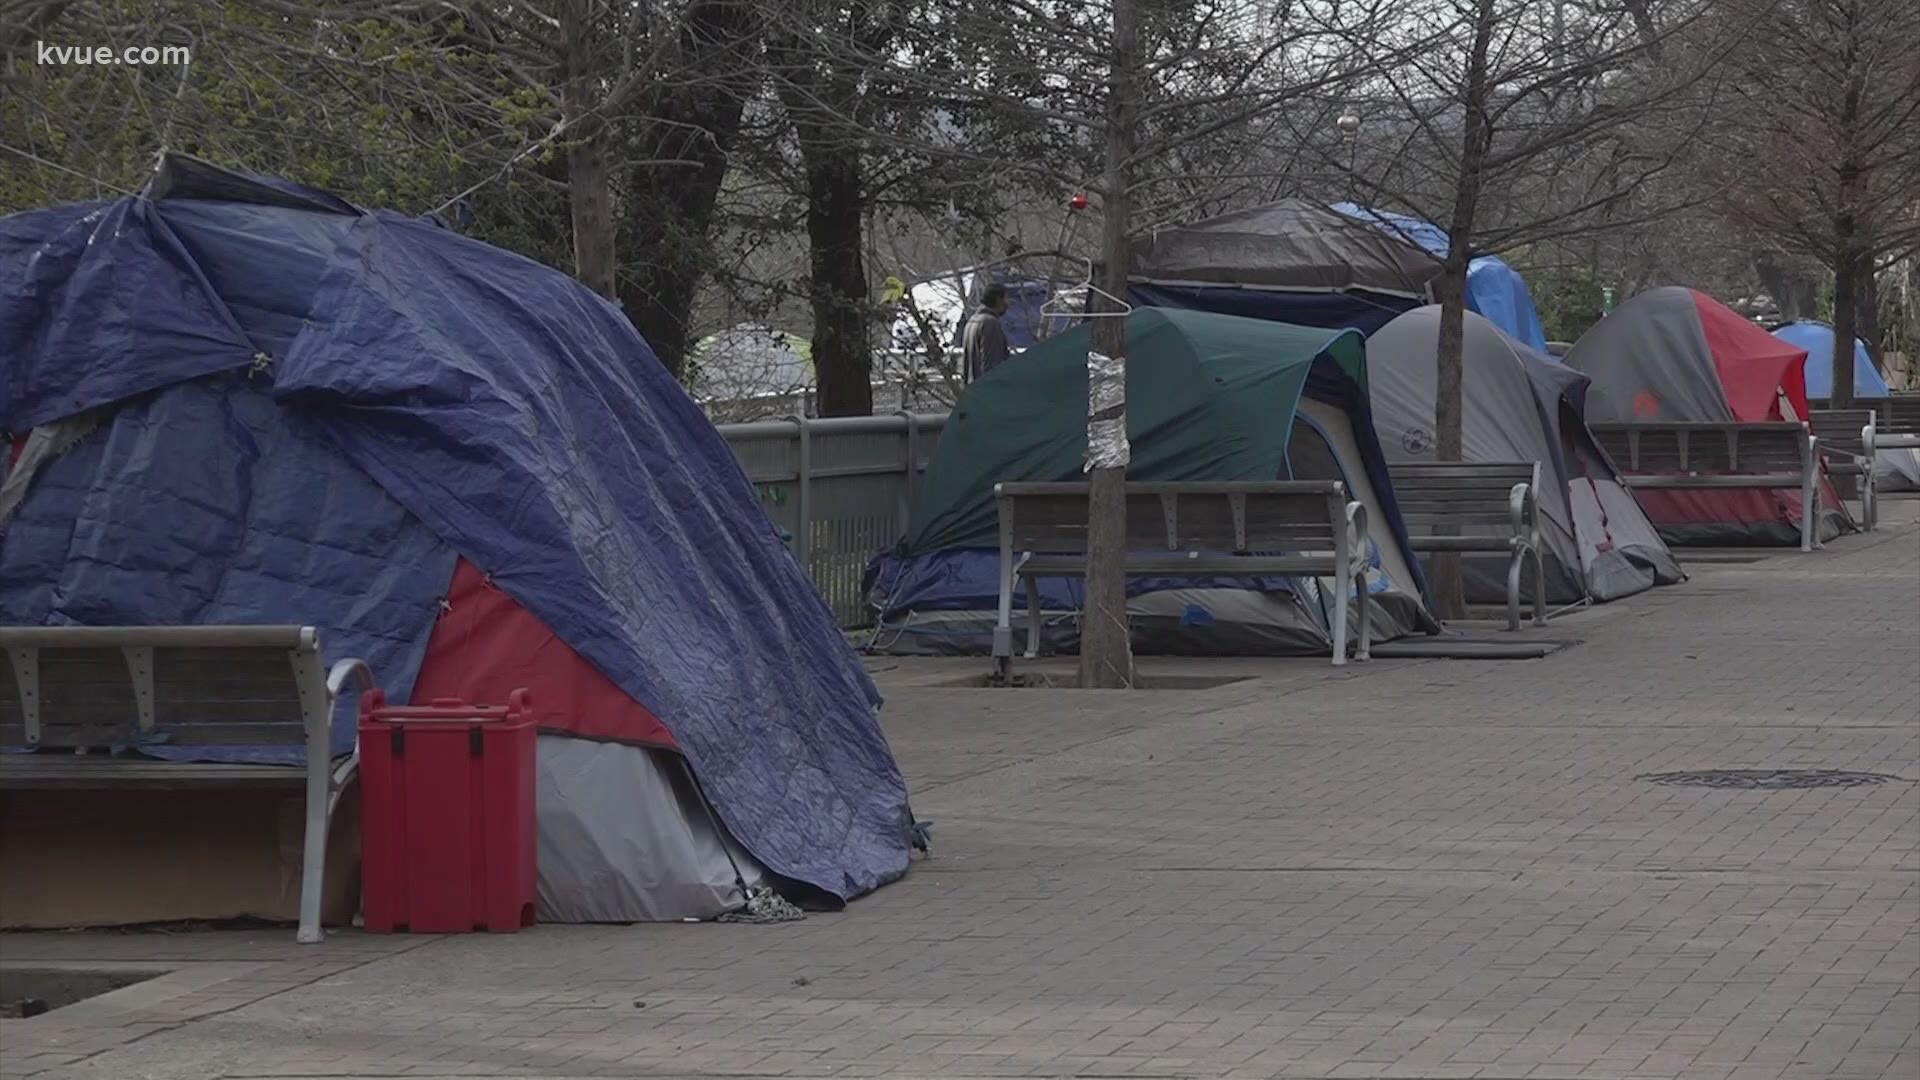 The question of a homeless camping ban will be going to a May ballot in Austin. The council's HEAL initiative will mean future camping bans in four city areas.